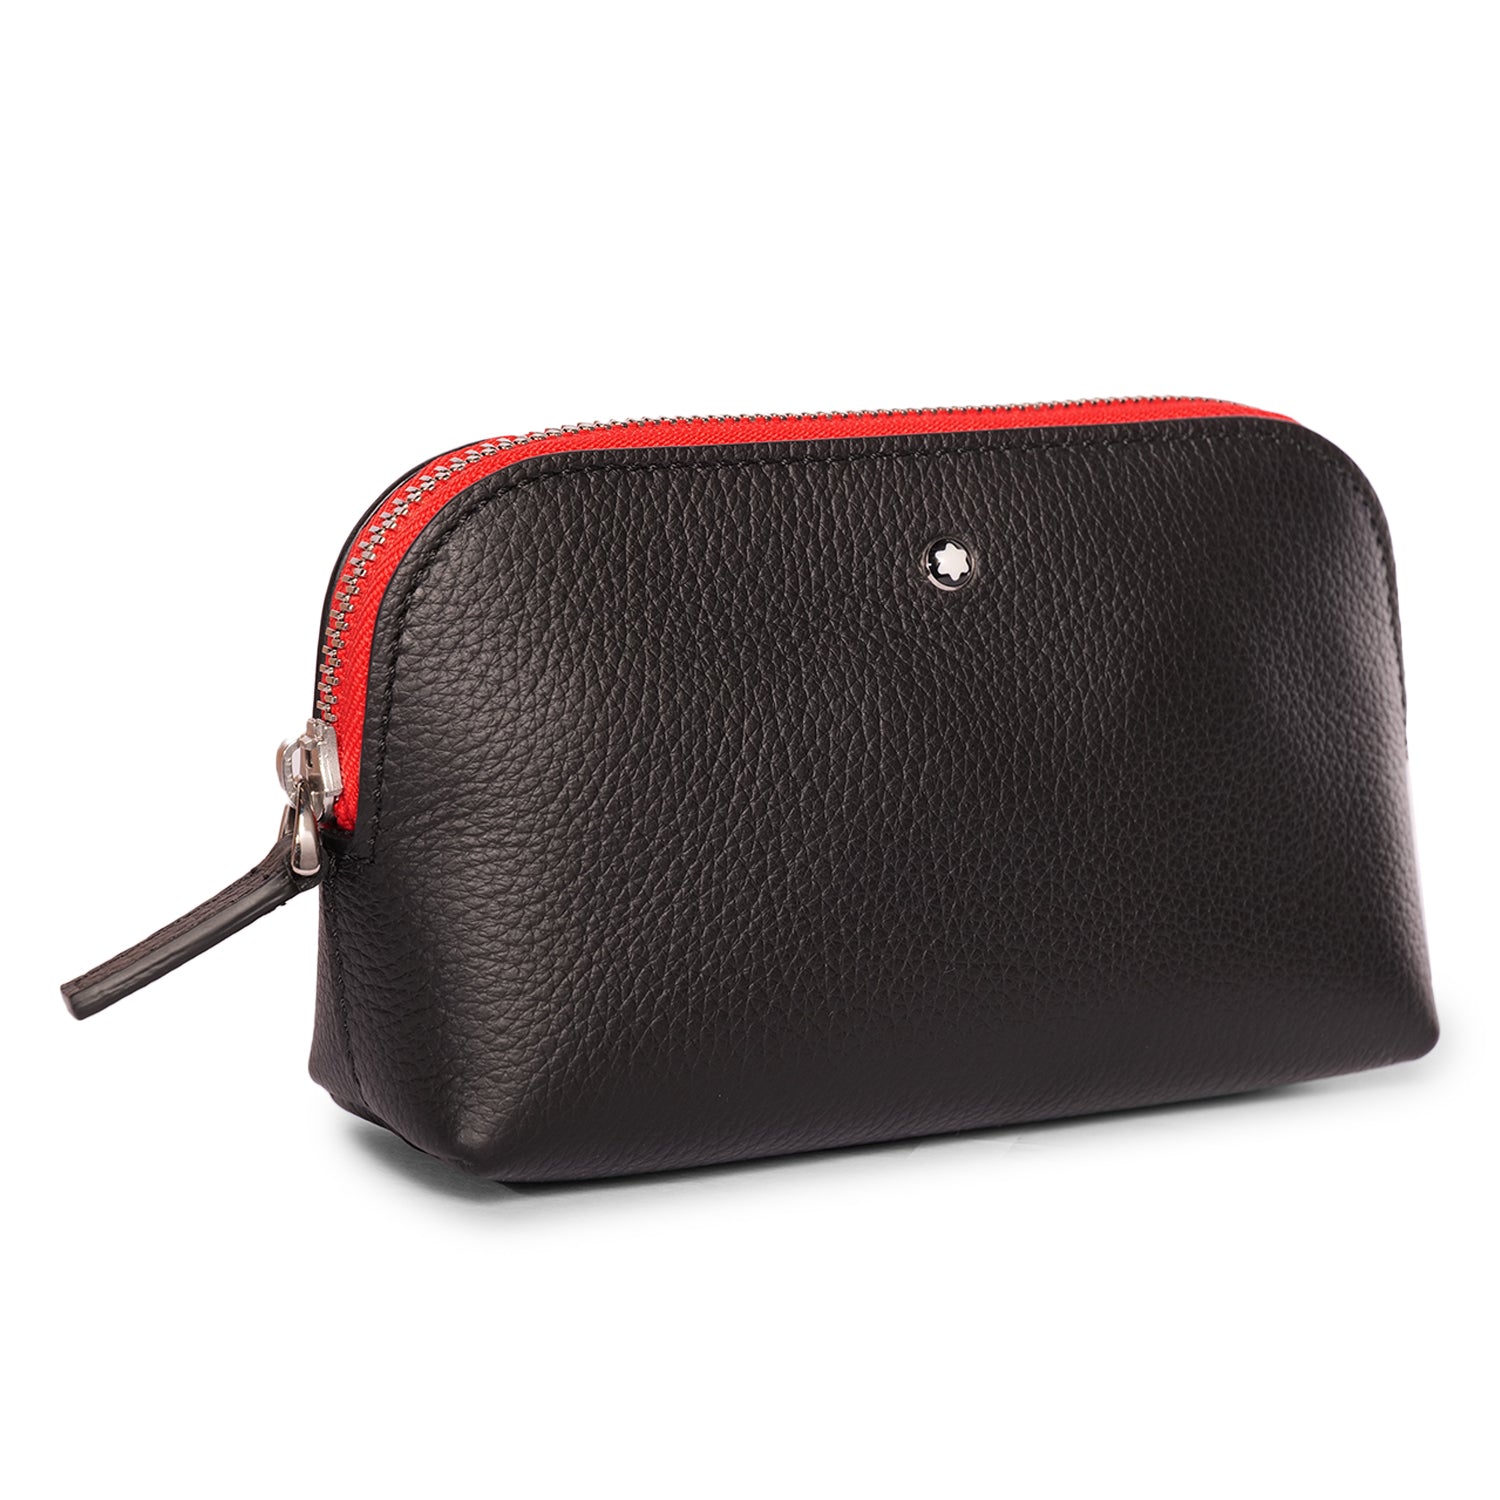 MONT BLANC MINI OFFICE CASE IN BLACK-RED